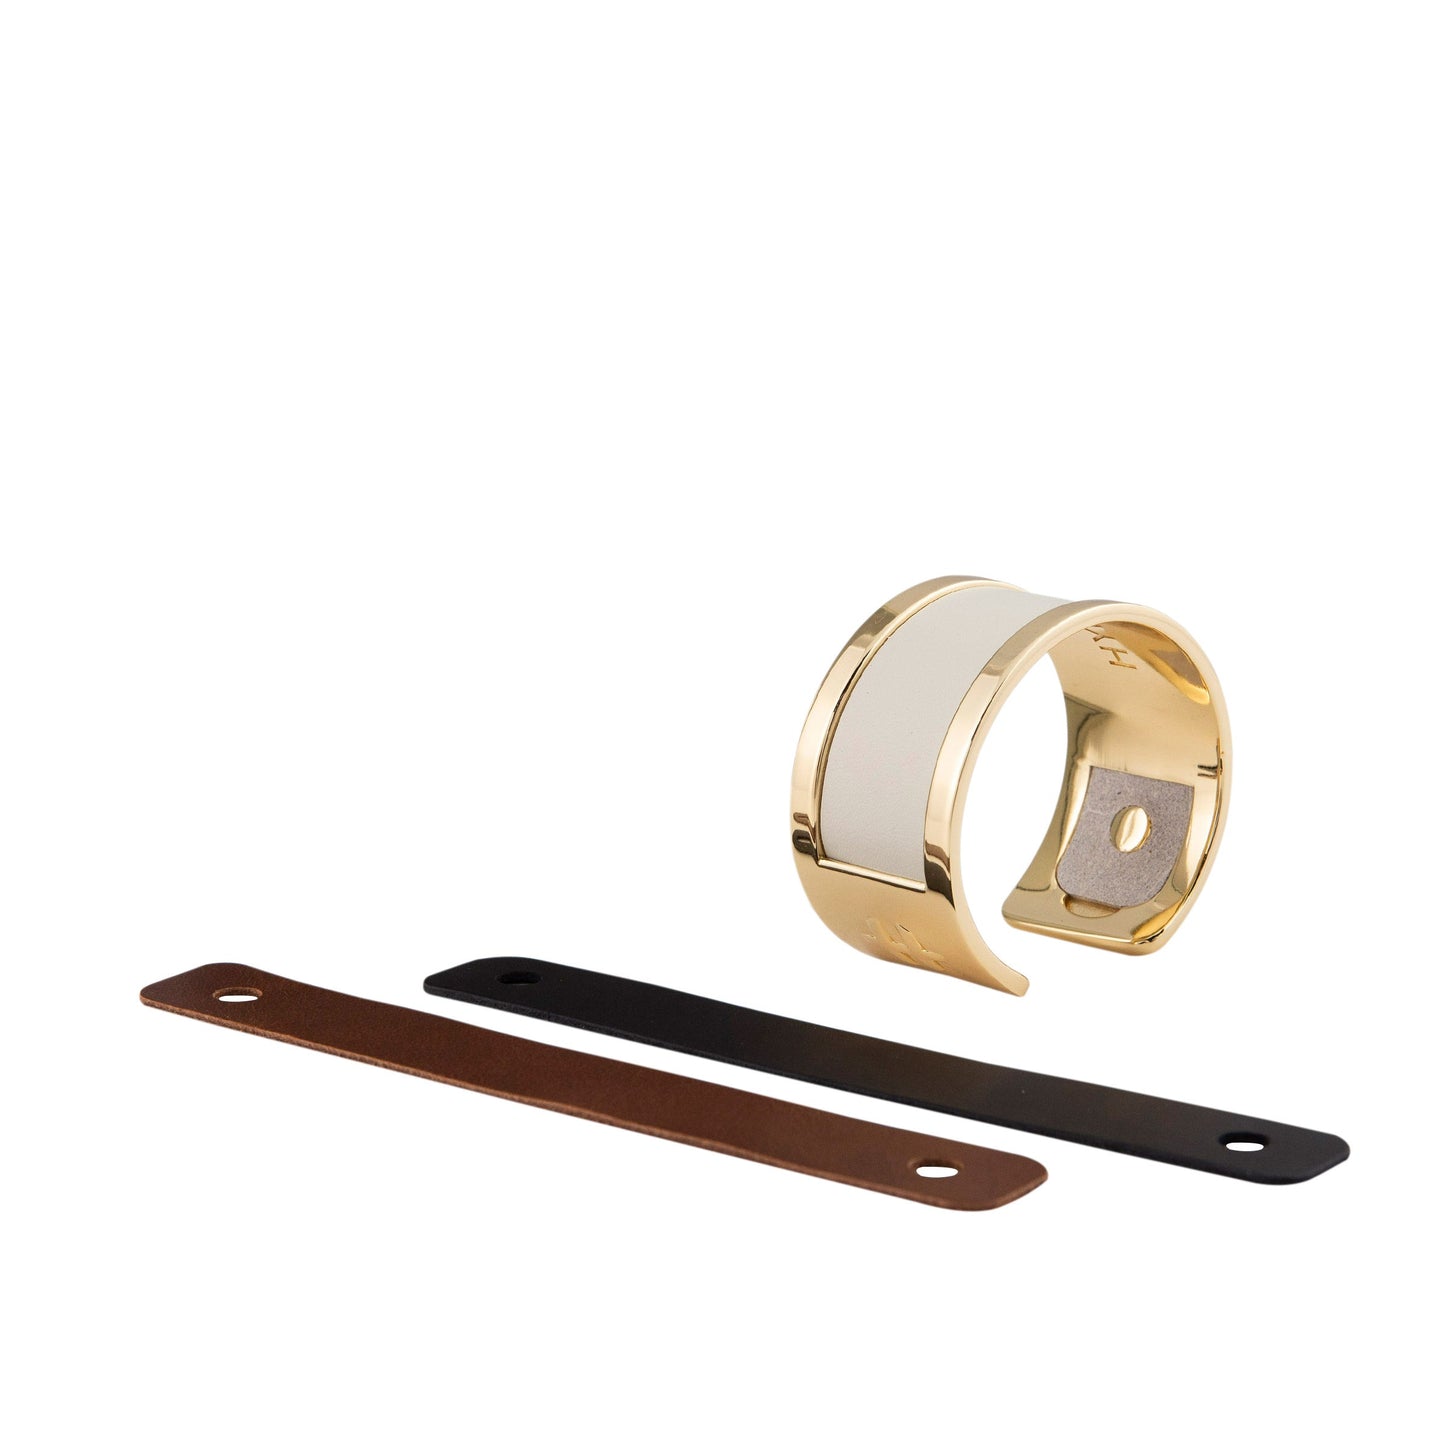 OG2 Gold Cuff with Basic Leathers